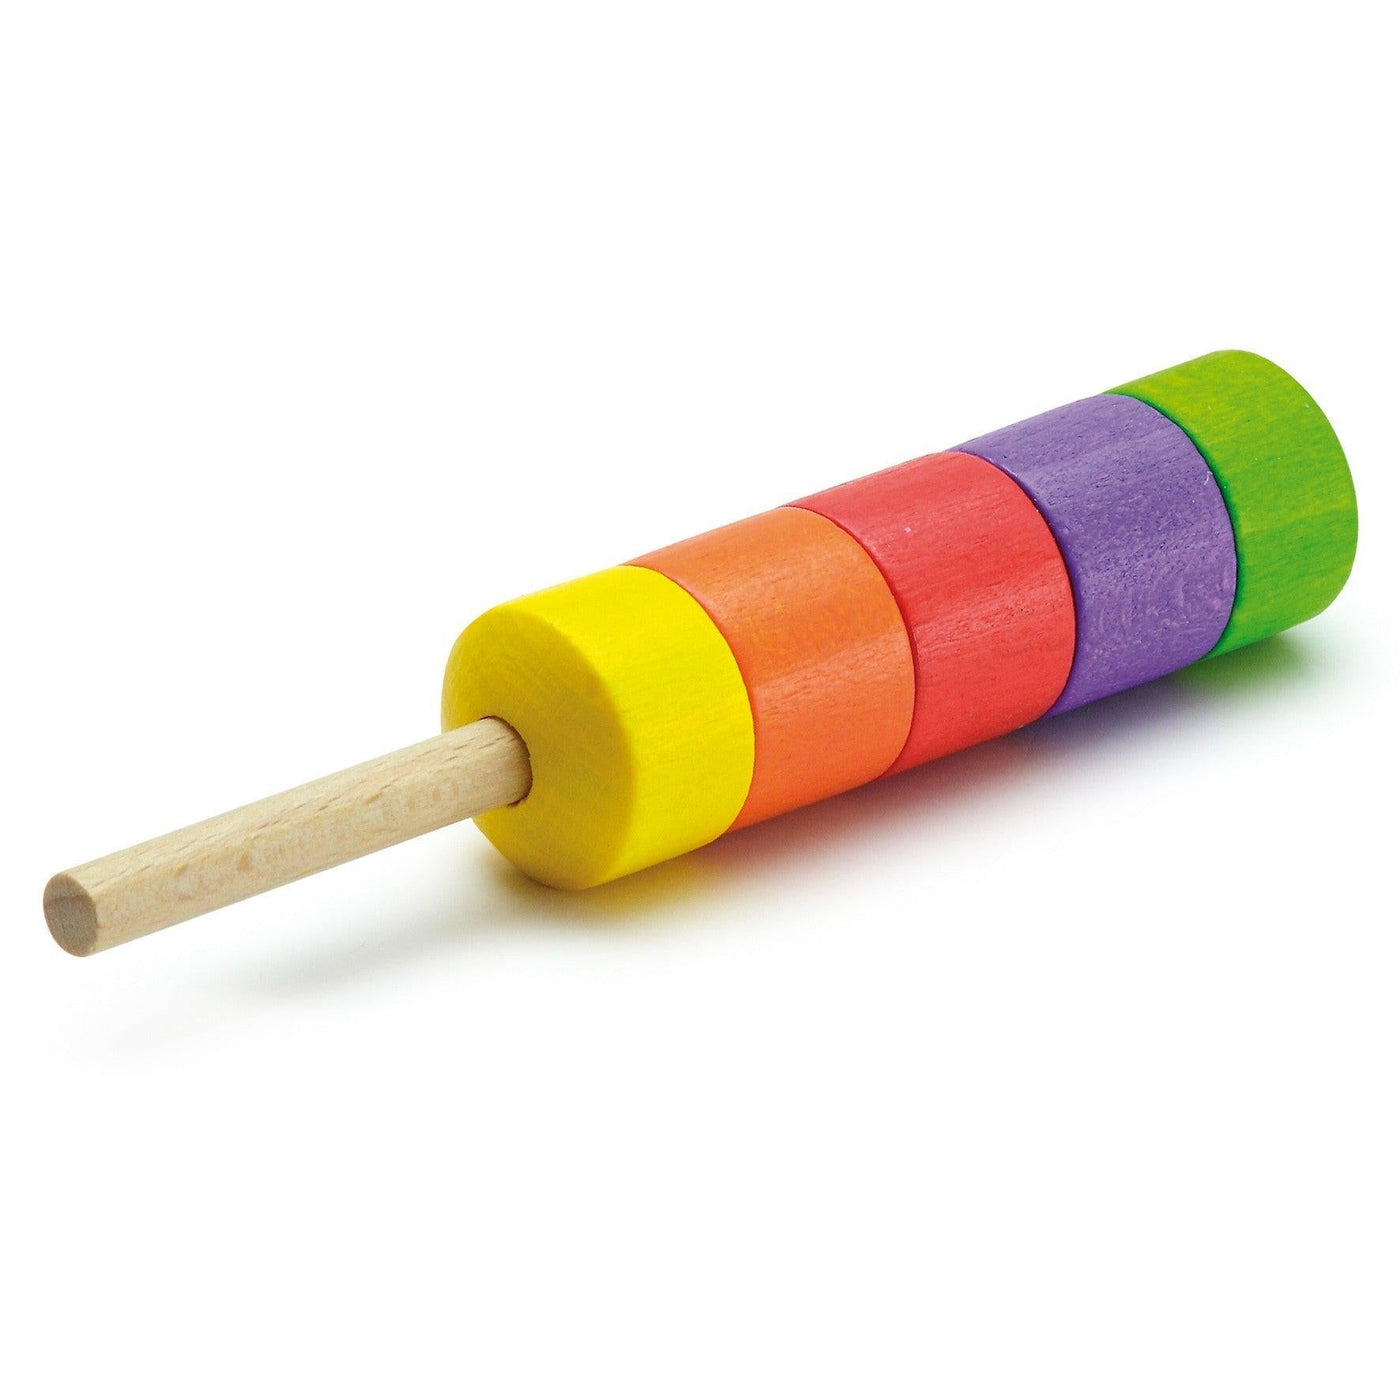 Erzi Icy Lolly Colours - Wooden Play Food